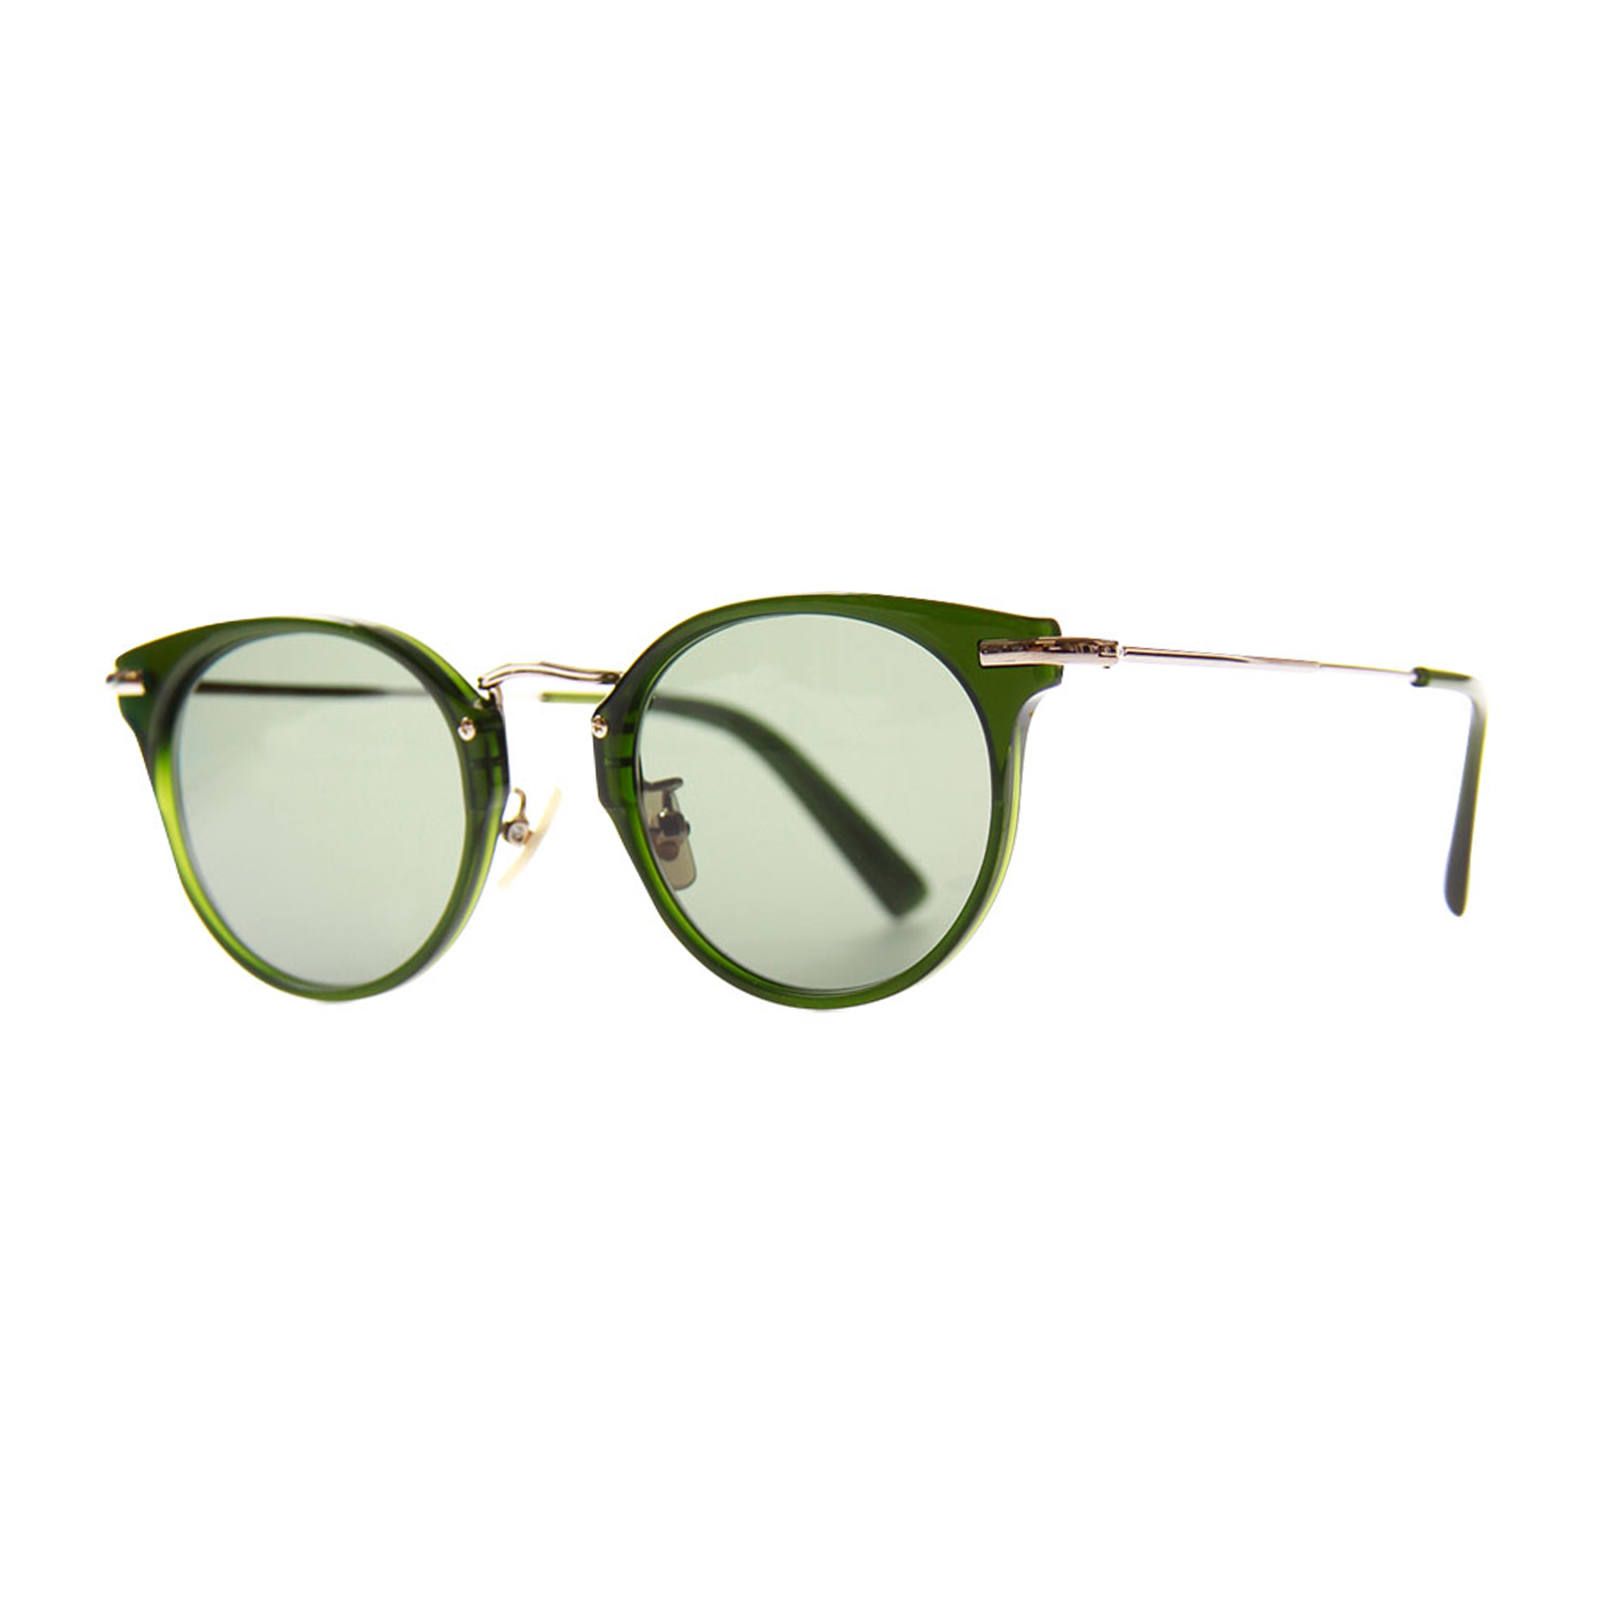 Abbey/Gold/Olive (Sunglasses) - 47□22 145